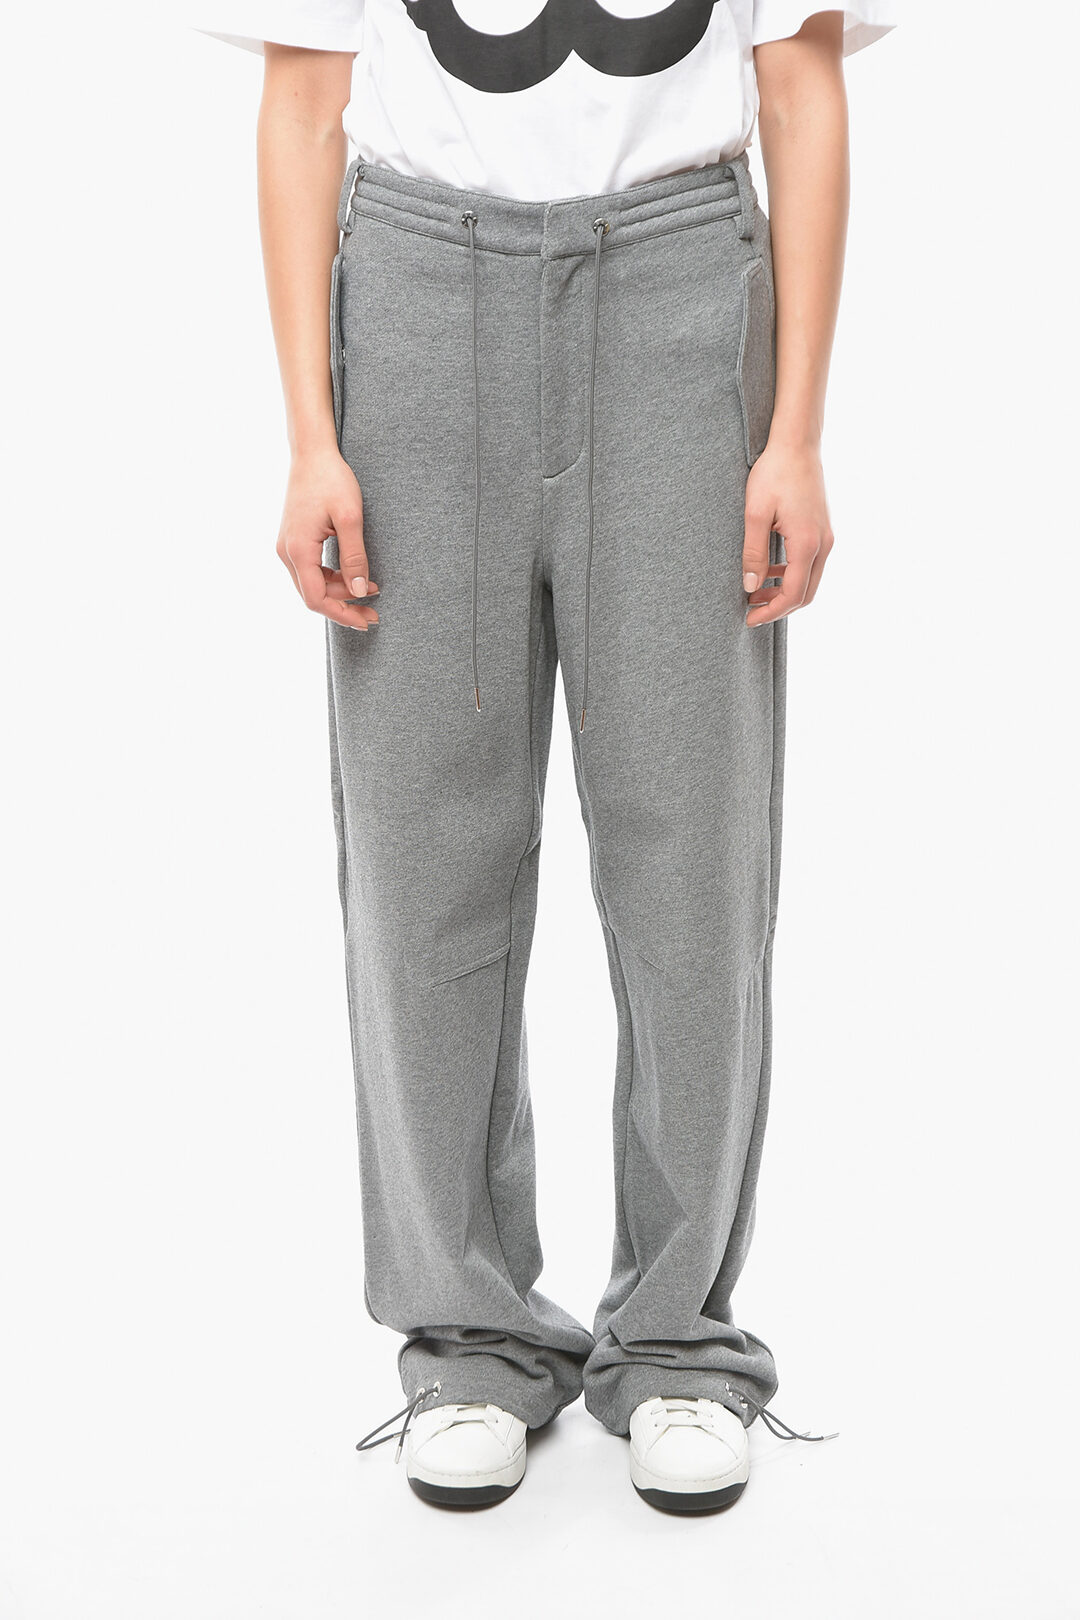 Sweatpants You Can Wear To Work | Men's Health